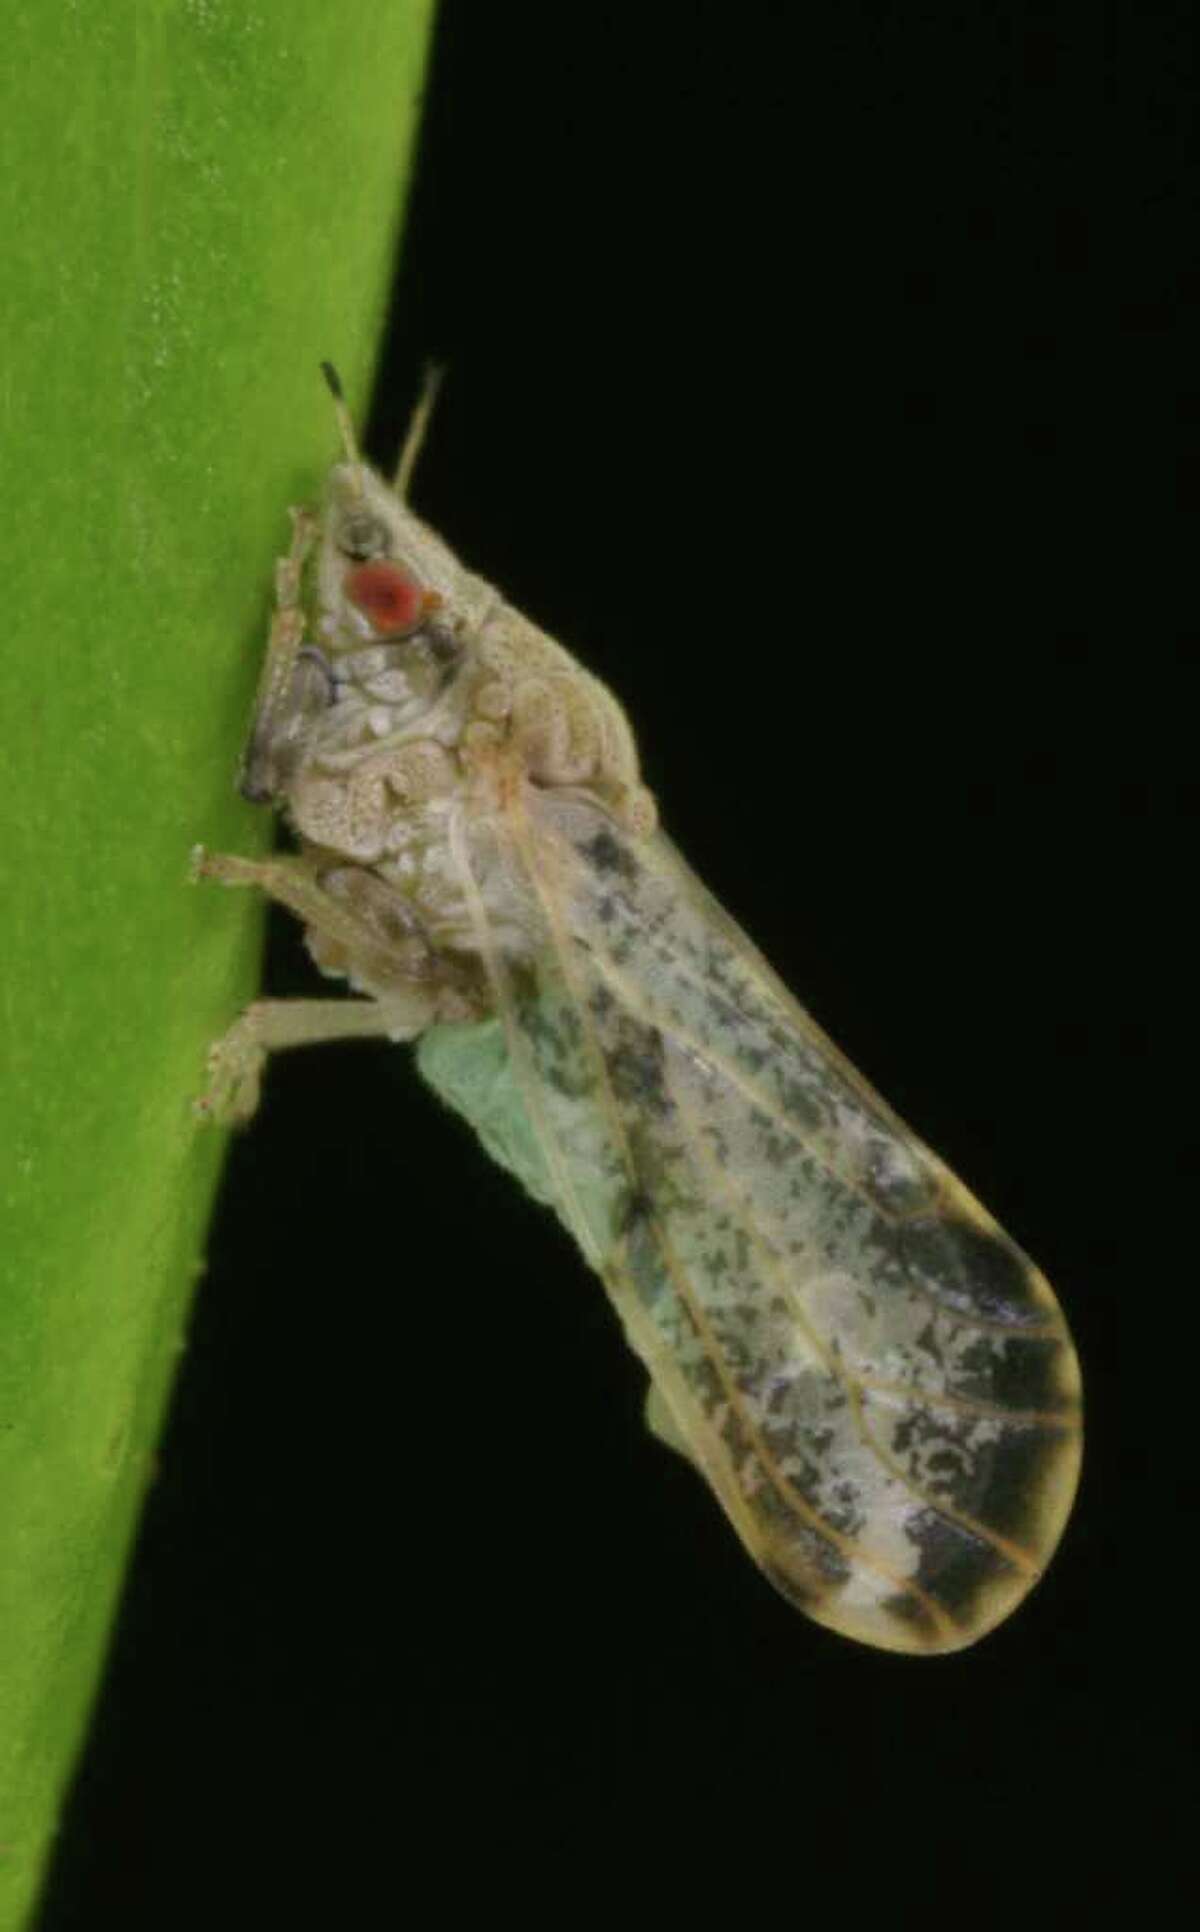 Ag extension officials are concerned about a deadly plant disease, citrus greening disease, that could be moving up Mexico and getting close to the Valley’s lush citrus orchards. The disease, citrus greening disease, already has killed vast acres of citrus plants in Florida and other states. The Asian citrus psyllid is a pest that acts as a carrier spreading citrus greening disease of citrus trees. This bacterial disease is transmitted to healthy trees by the psyllid after it feeds on infected plant tissue.